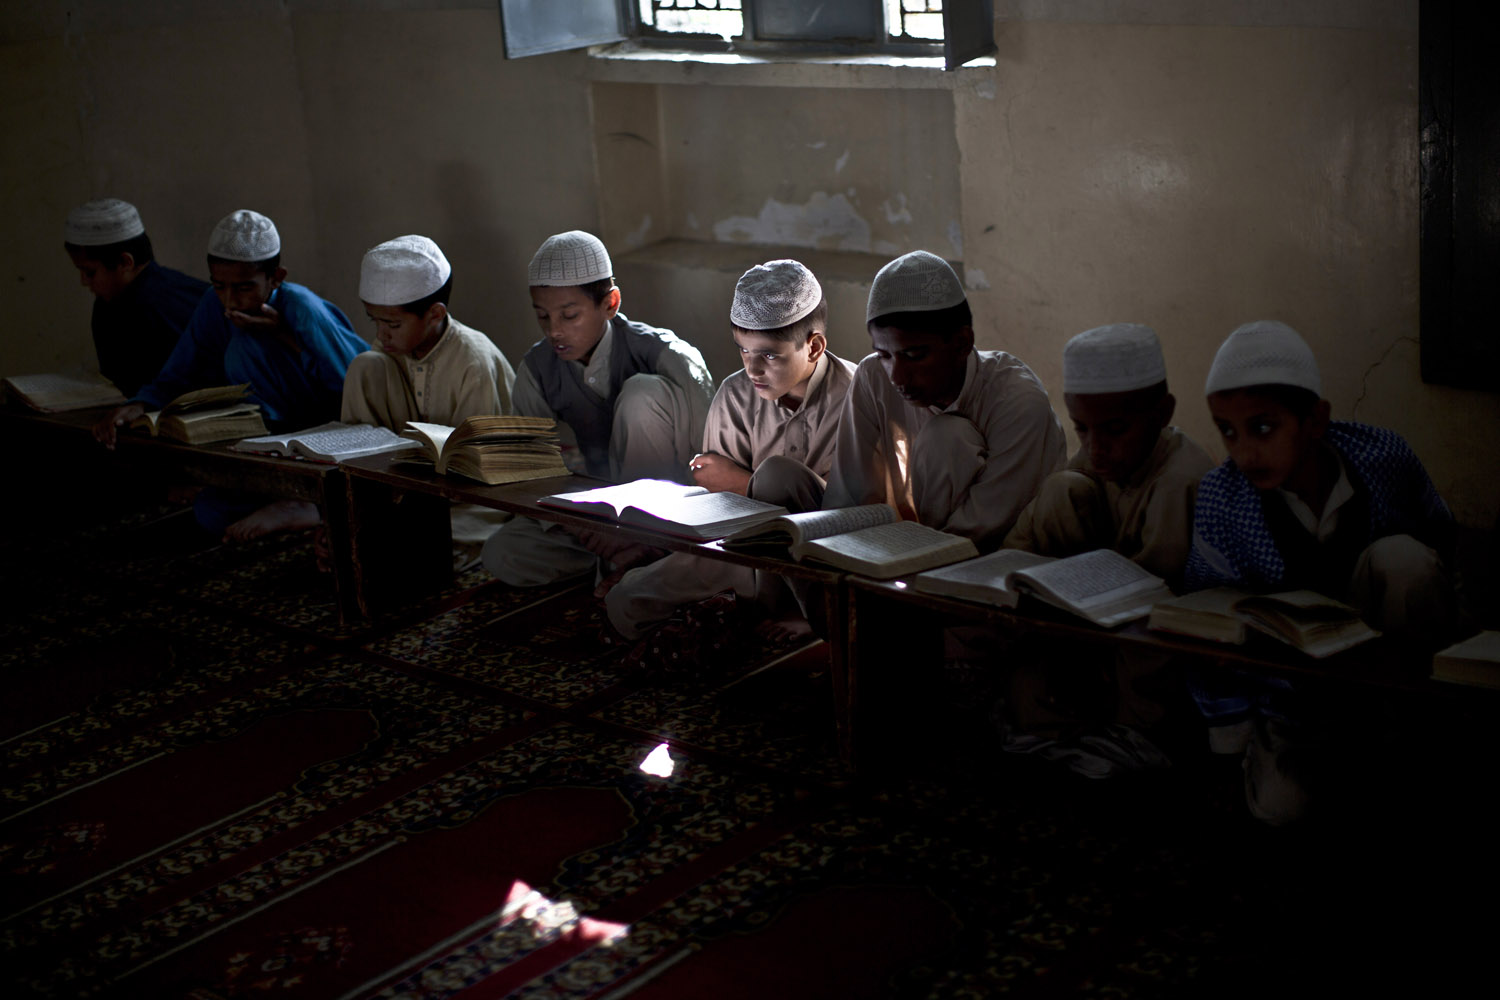 Oct. 28, 2013. Pakistani students of a Madrassa, or Islamic school, read verses of the Quran, at a mosque in Islamabad. Islamic schools form an important function within the Pakistan educational system.